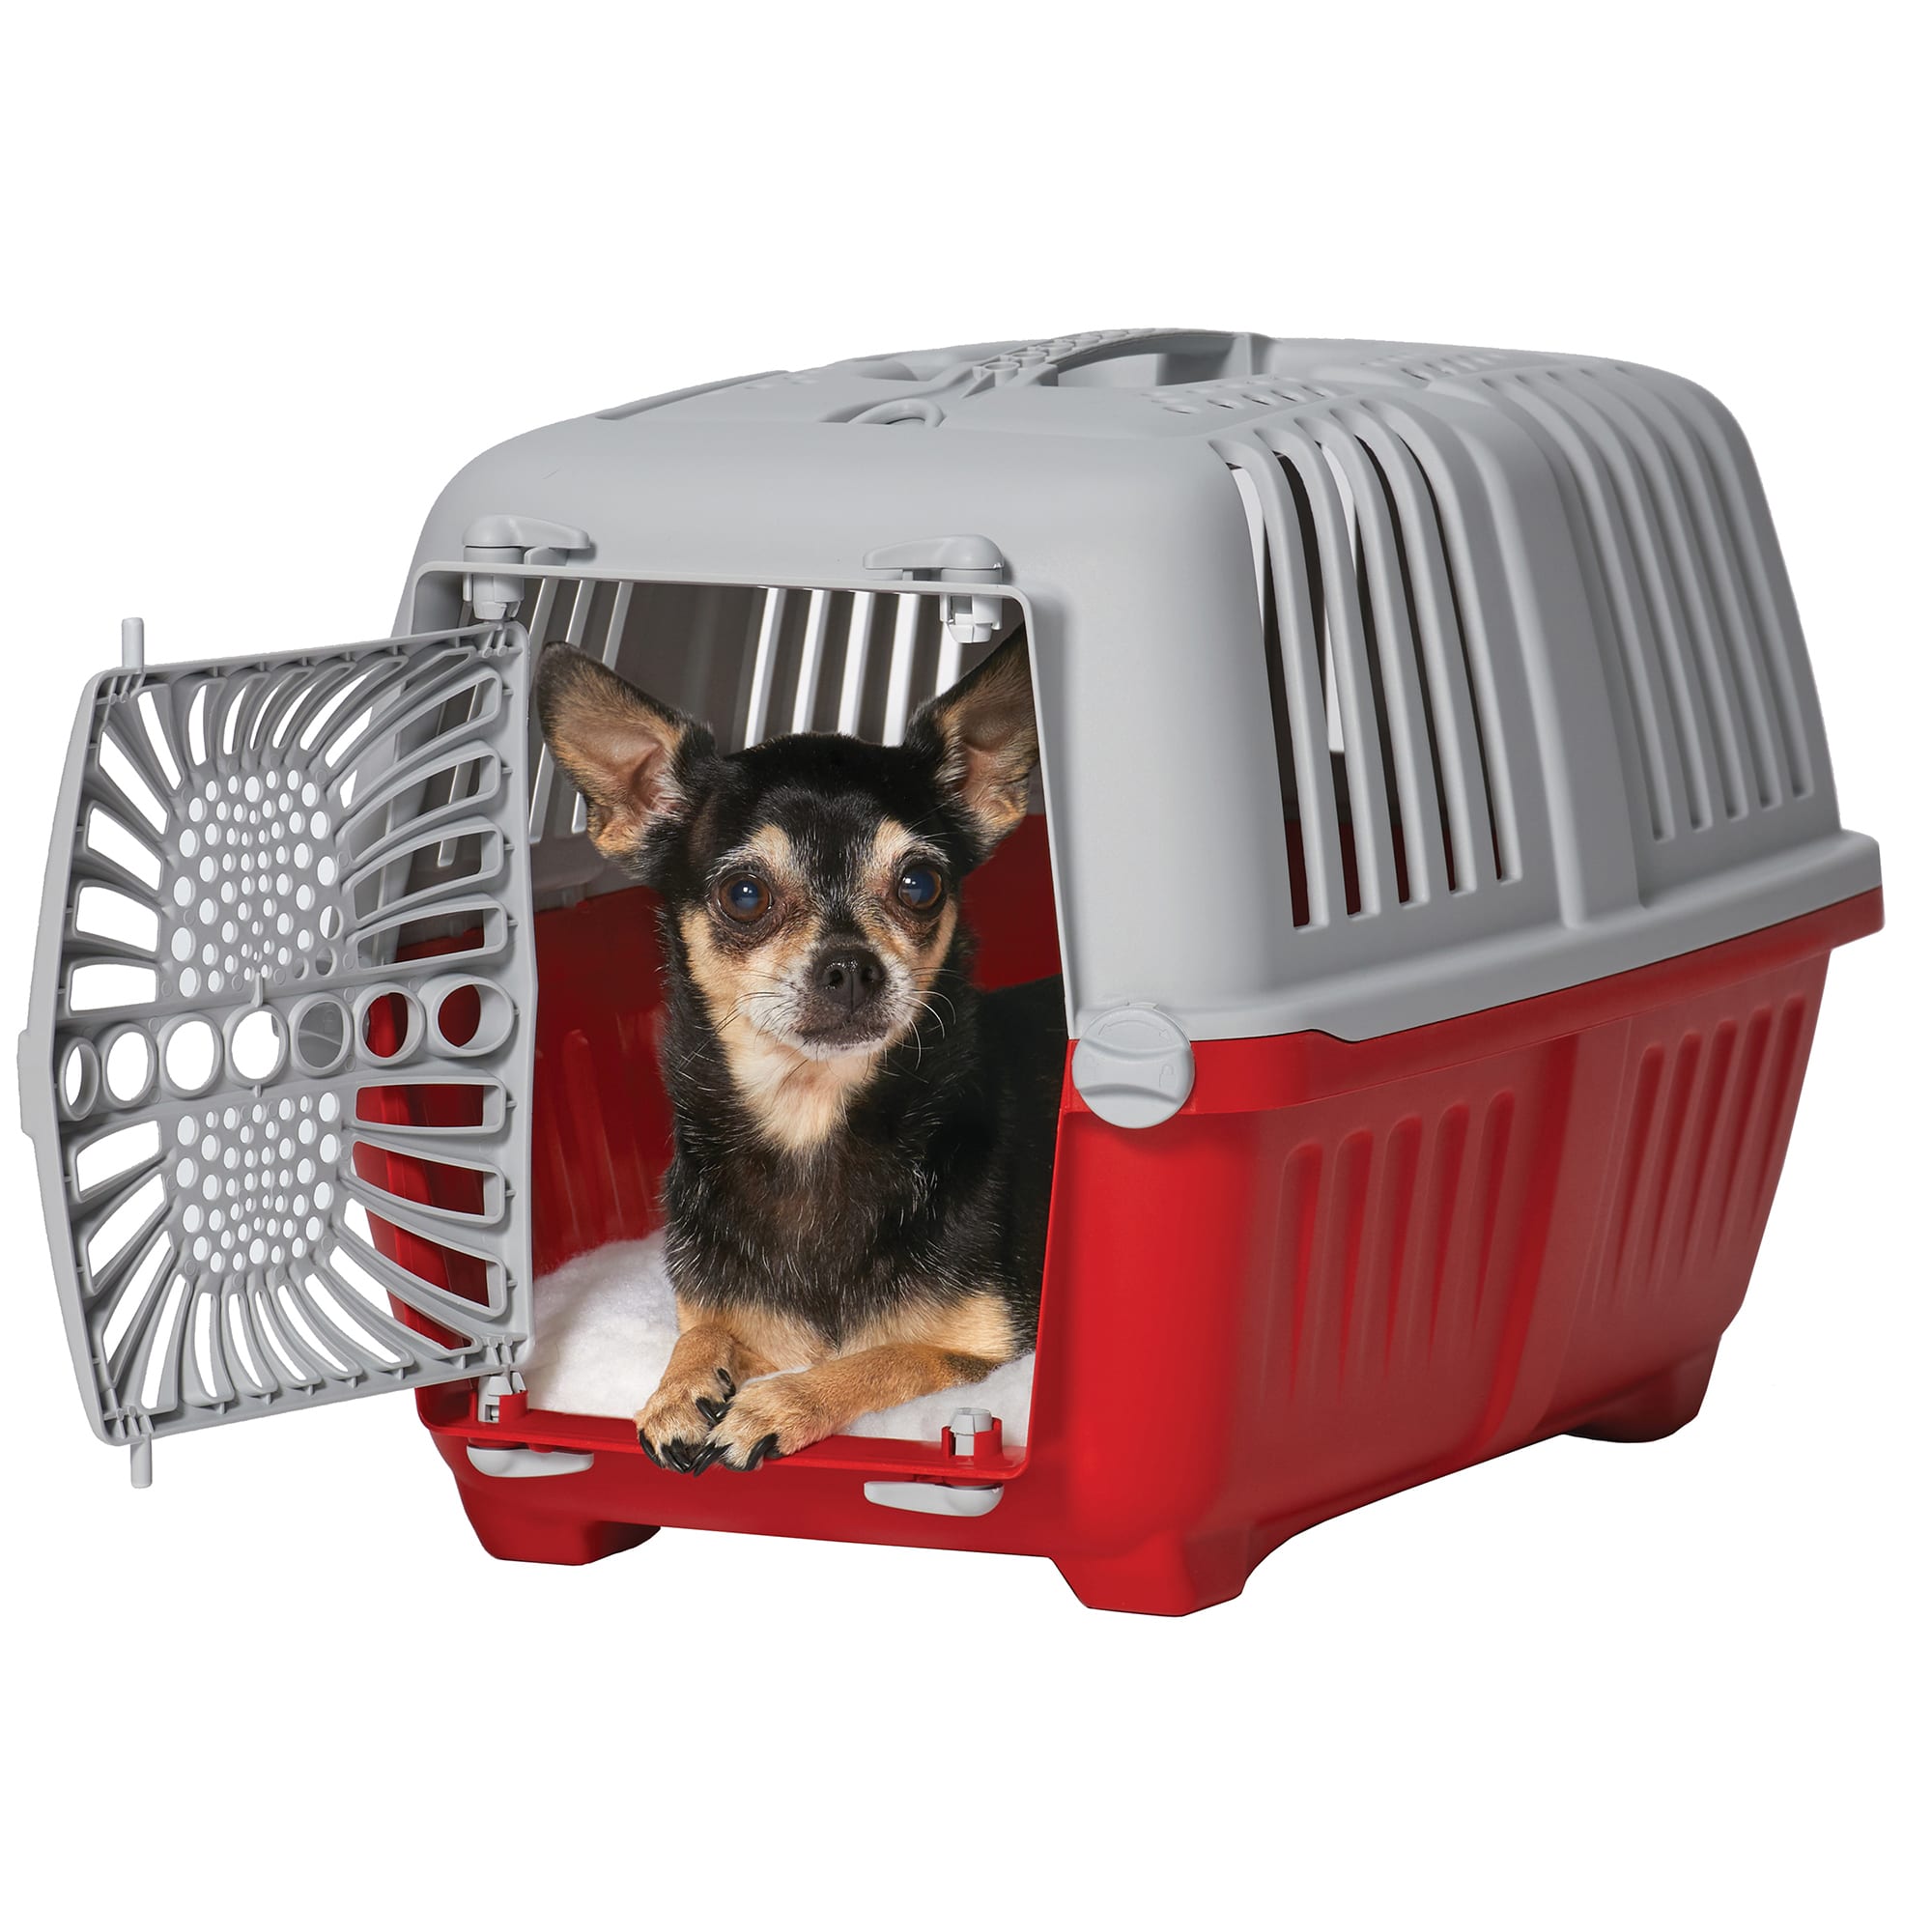 MISO PUP Interchangeable Base Pet Carrier OR Shell Totes for Small Dogs Airline Approved Mix & Match 